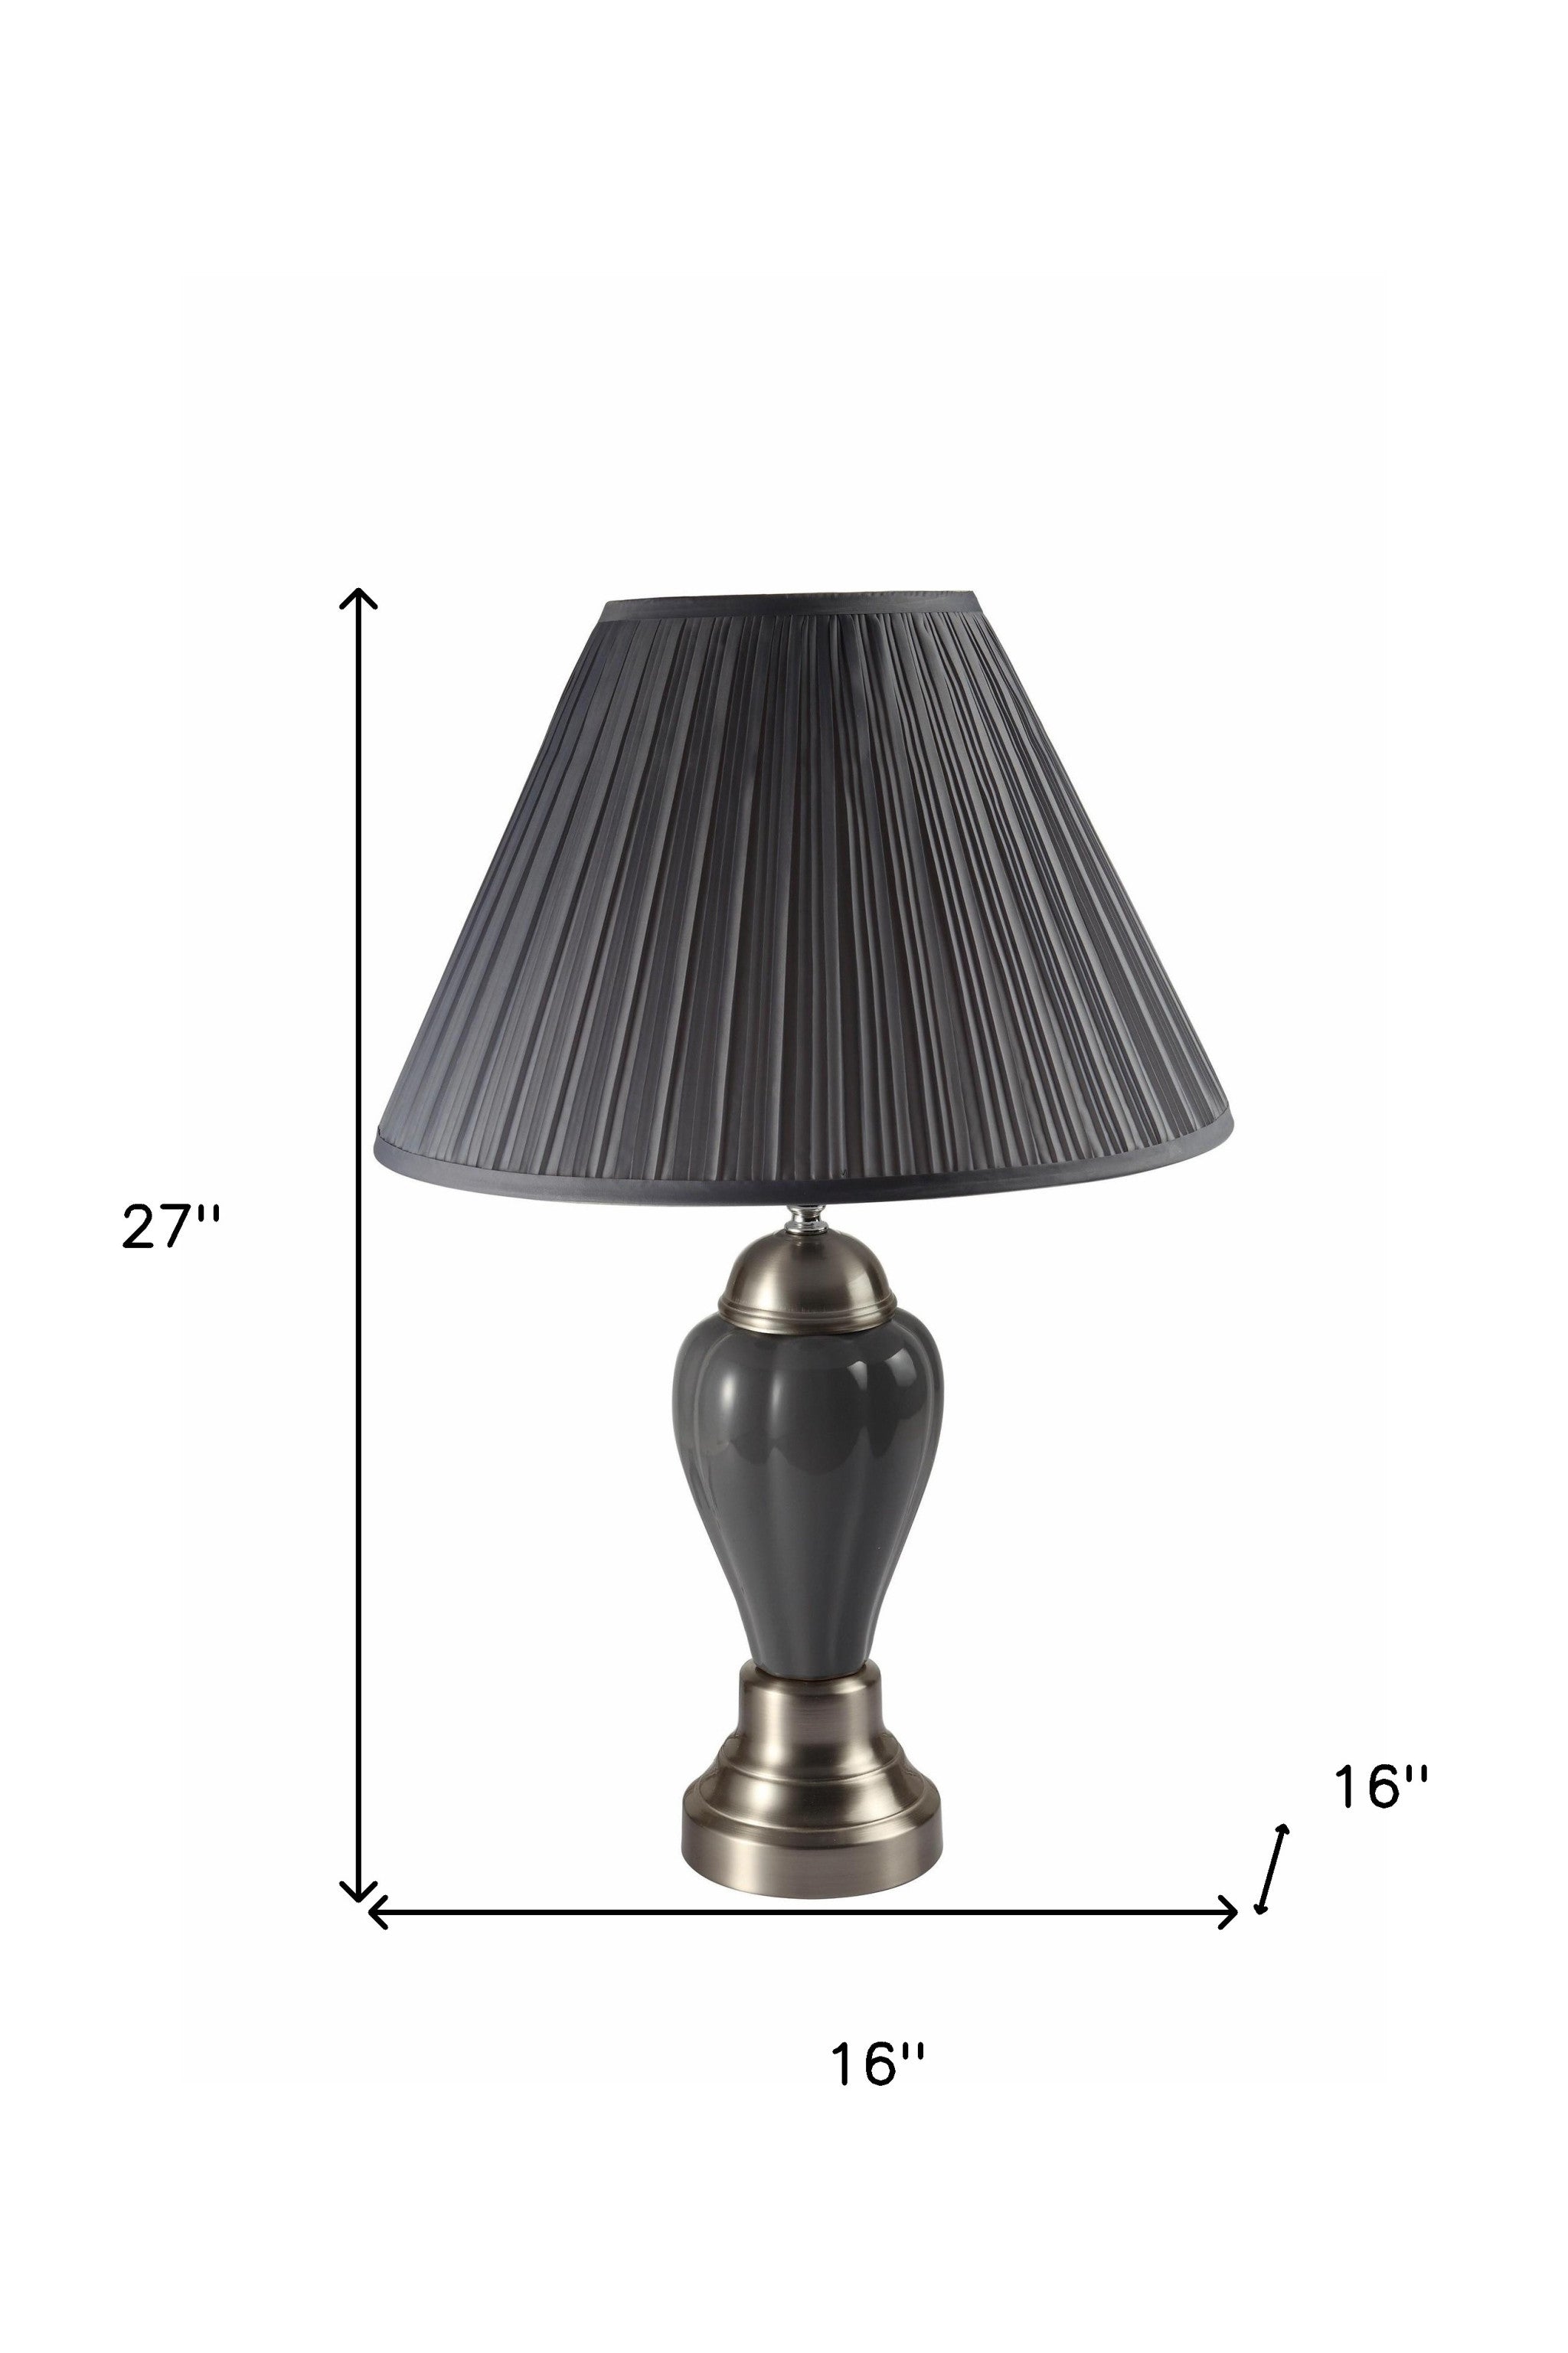 27" Gray Metal Bedside Table Lamp With Gray Shade